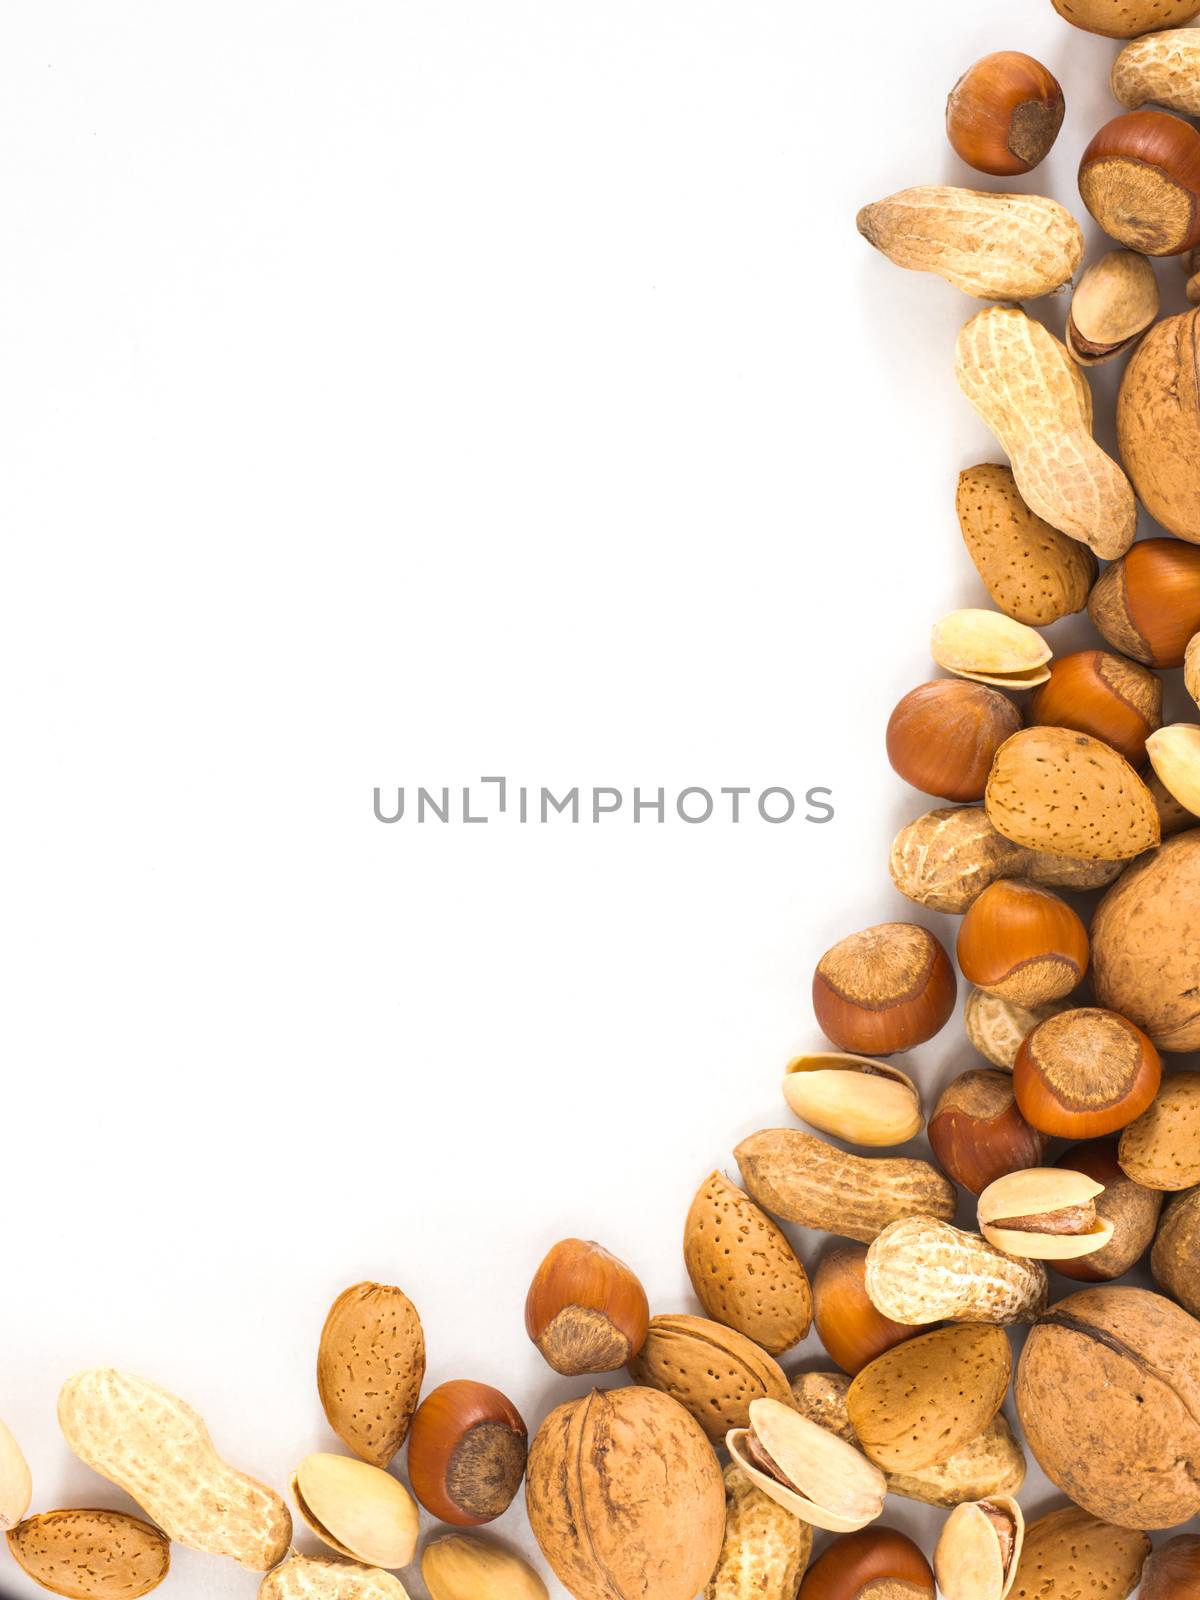 Background of mixed nuts in shell - hazelnuts, almonds, walnuts, pistachios, peanuts not peeled - vertical with copy space. Isolated one edge. Top view or flat lay